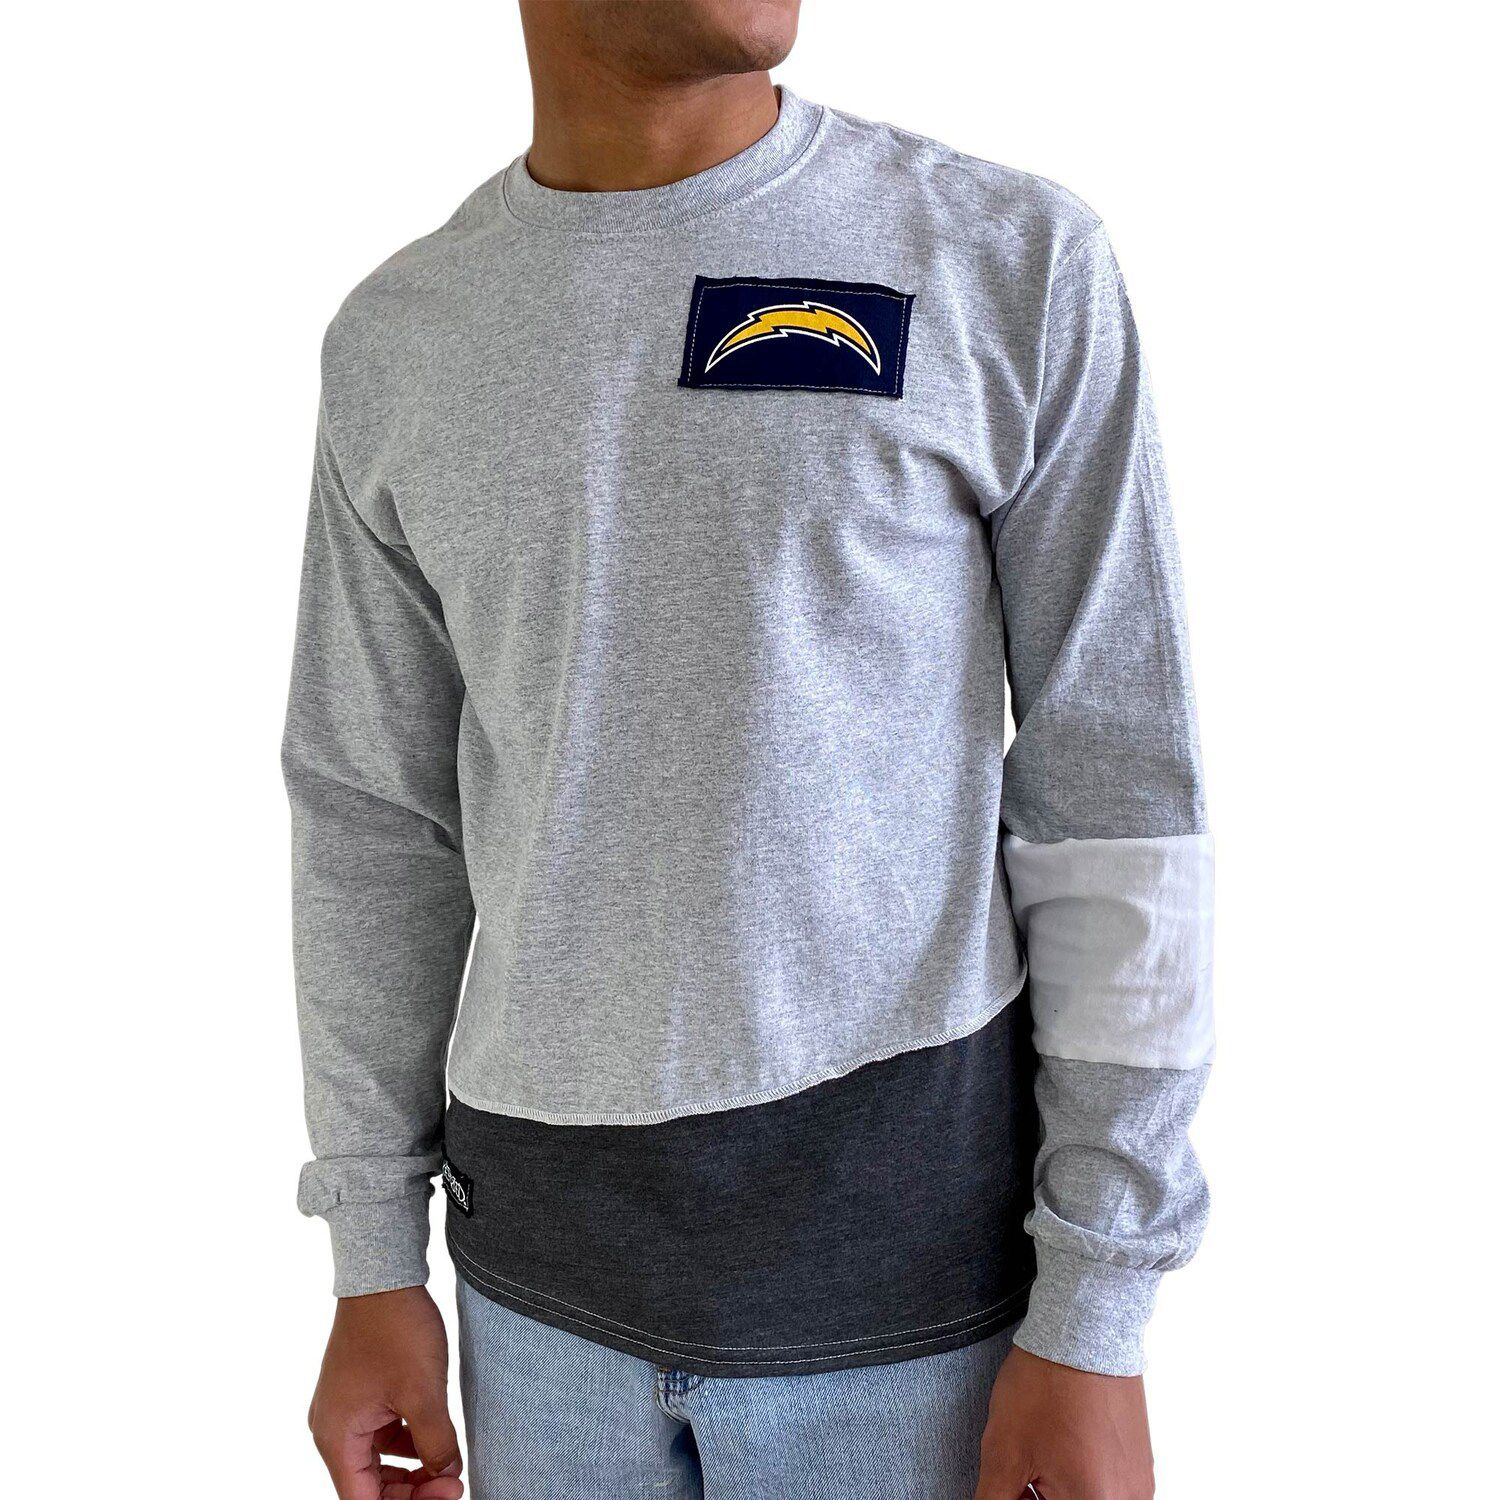 Image for Unbranded Men's Refried Apparel Gray Los Angeles Chargers Angle Long Sleeve T-Shirt at Kohl's.